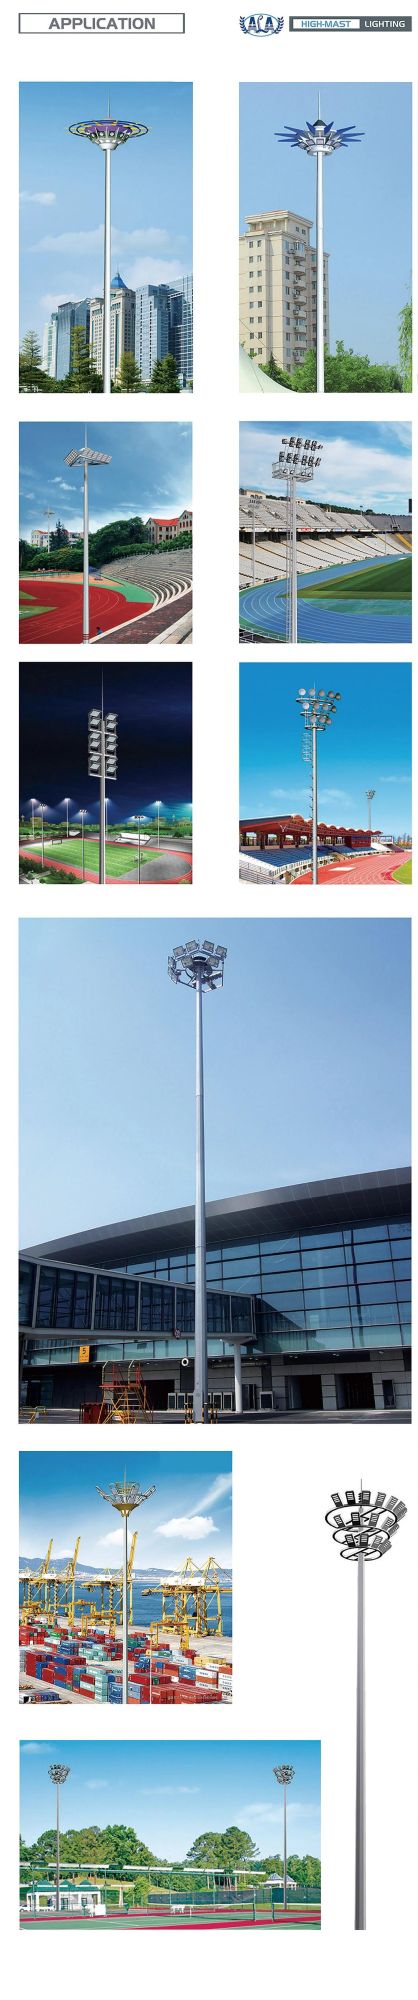 Ala Hot Sale Steel Round 100W High Mast Light with Pole Light for Outdoor Lighting 15m 20m 25m 30m